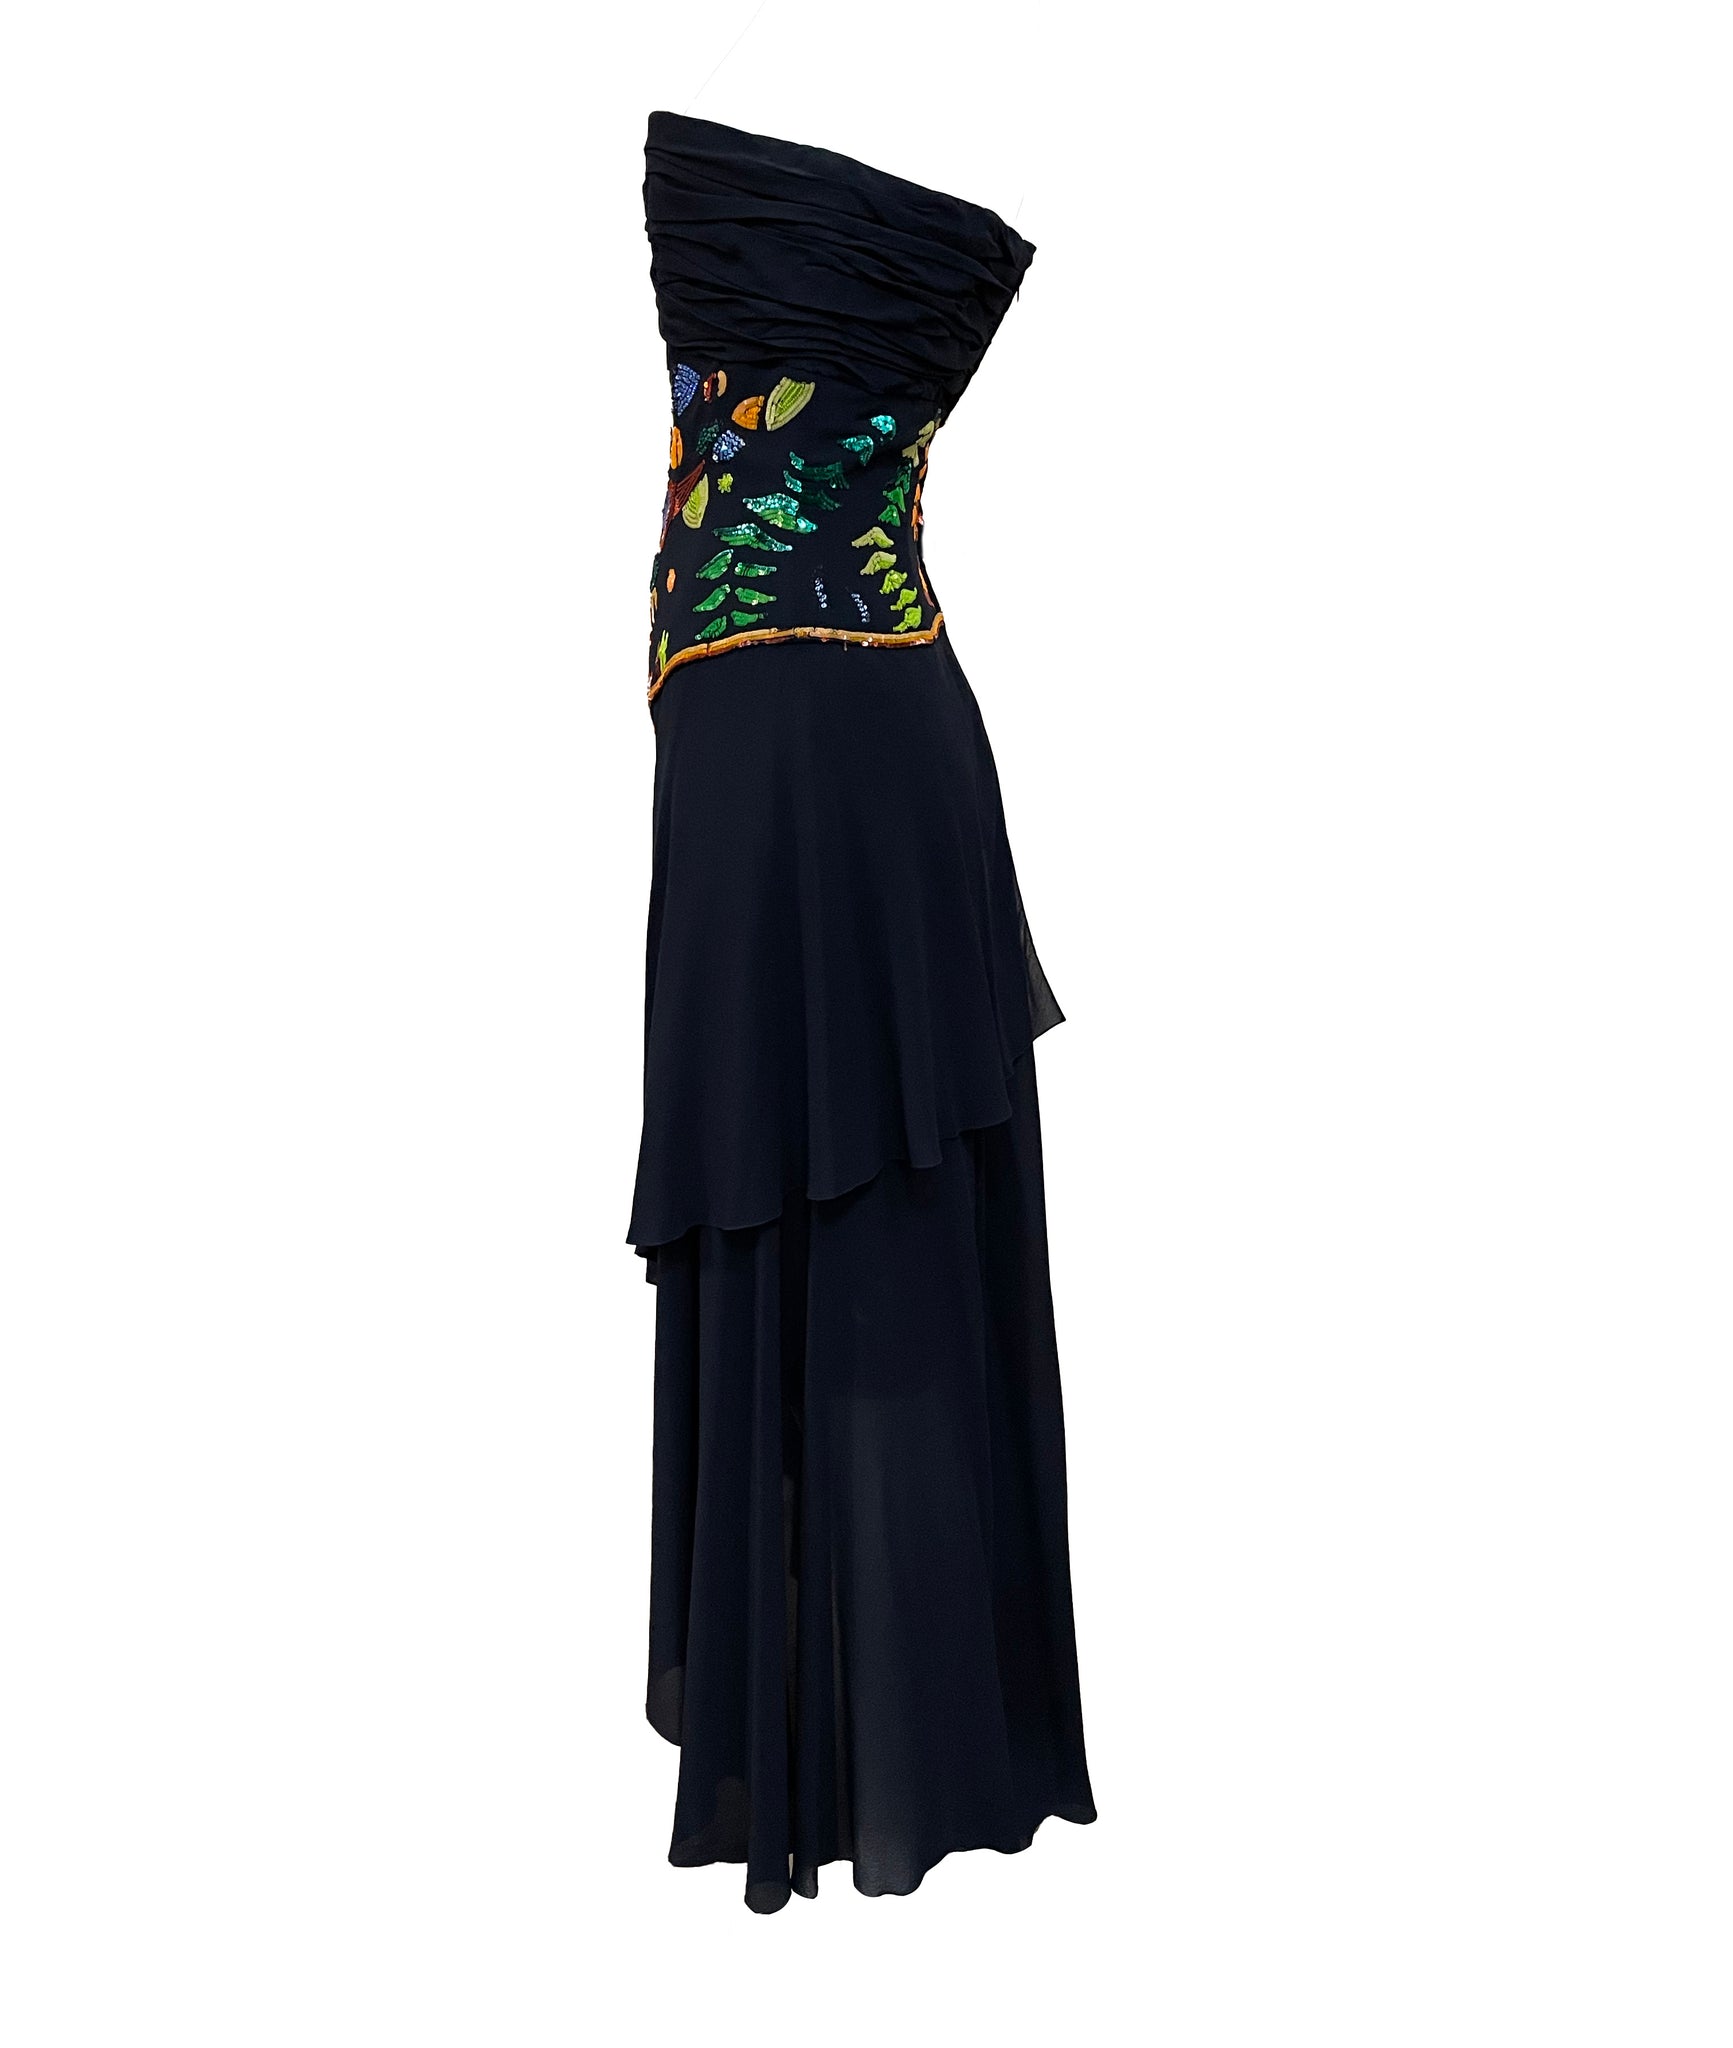  Karl  Lagerfeld 80s Midnight Blue Sequined  Strapless Cocktail Dress SIDE 2 of 5